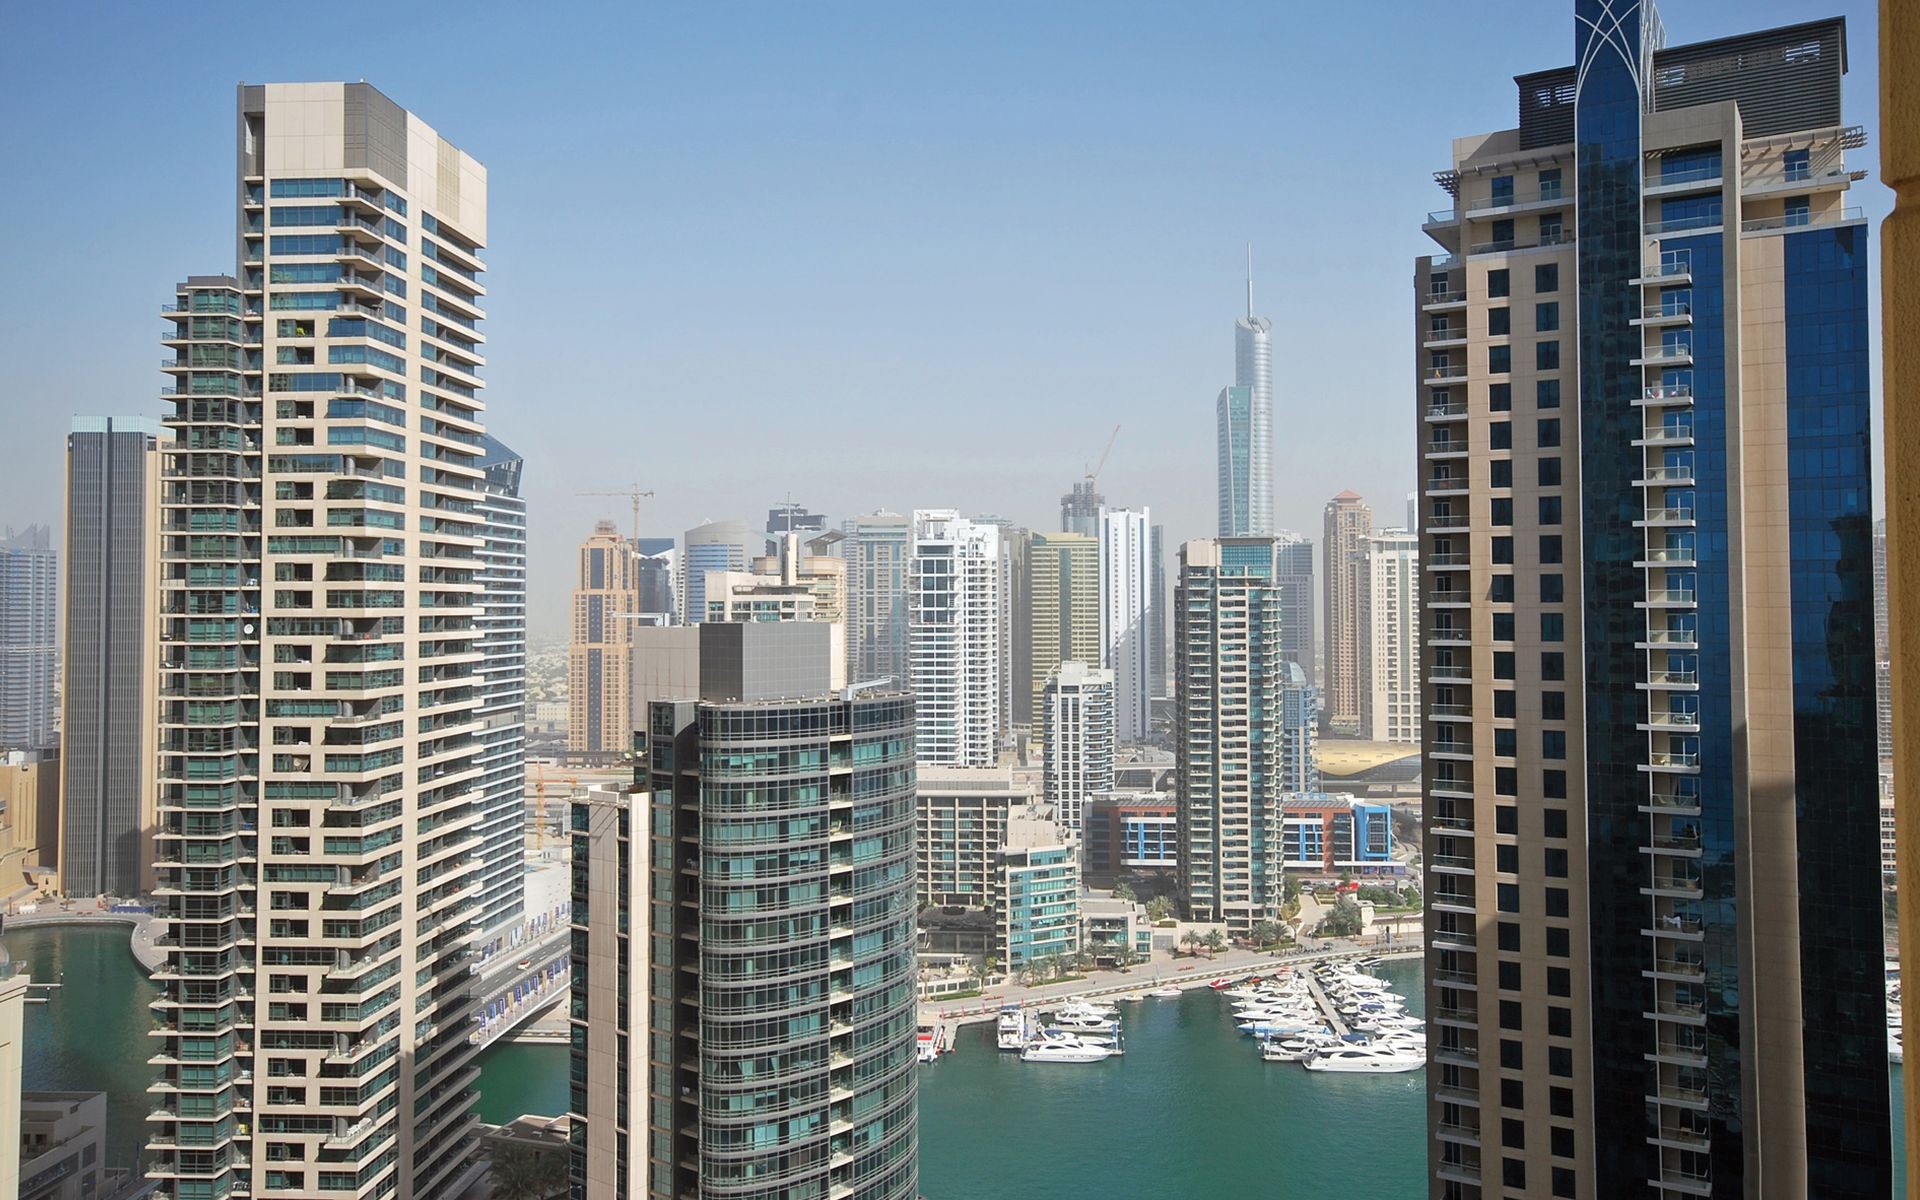 Dubai Marina wallpapers and images - wallpapers, pictures, photos